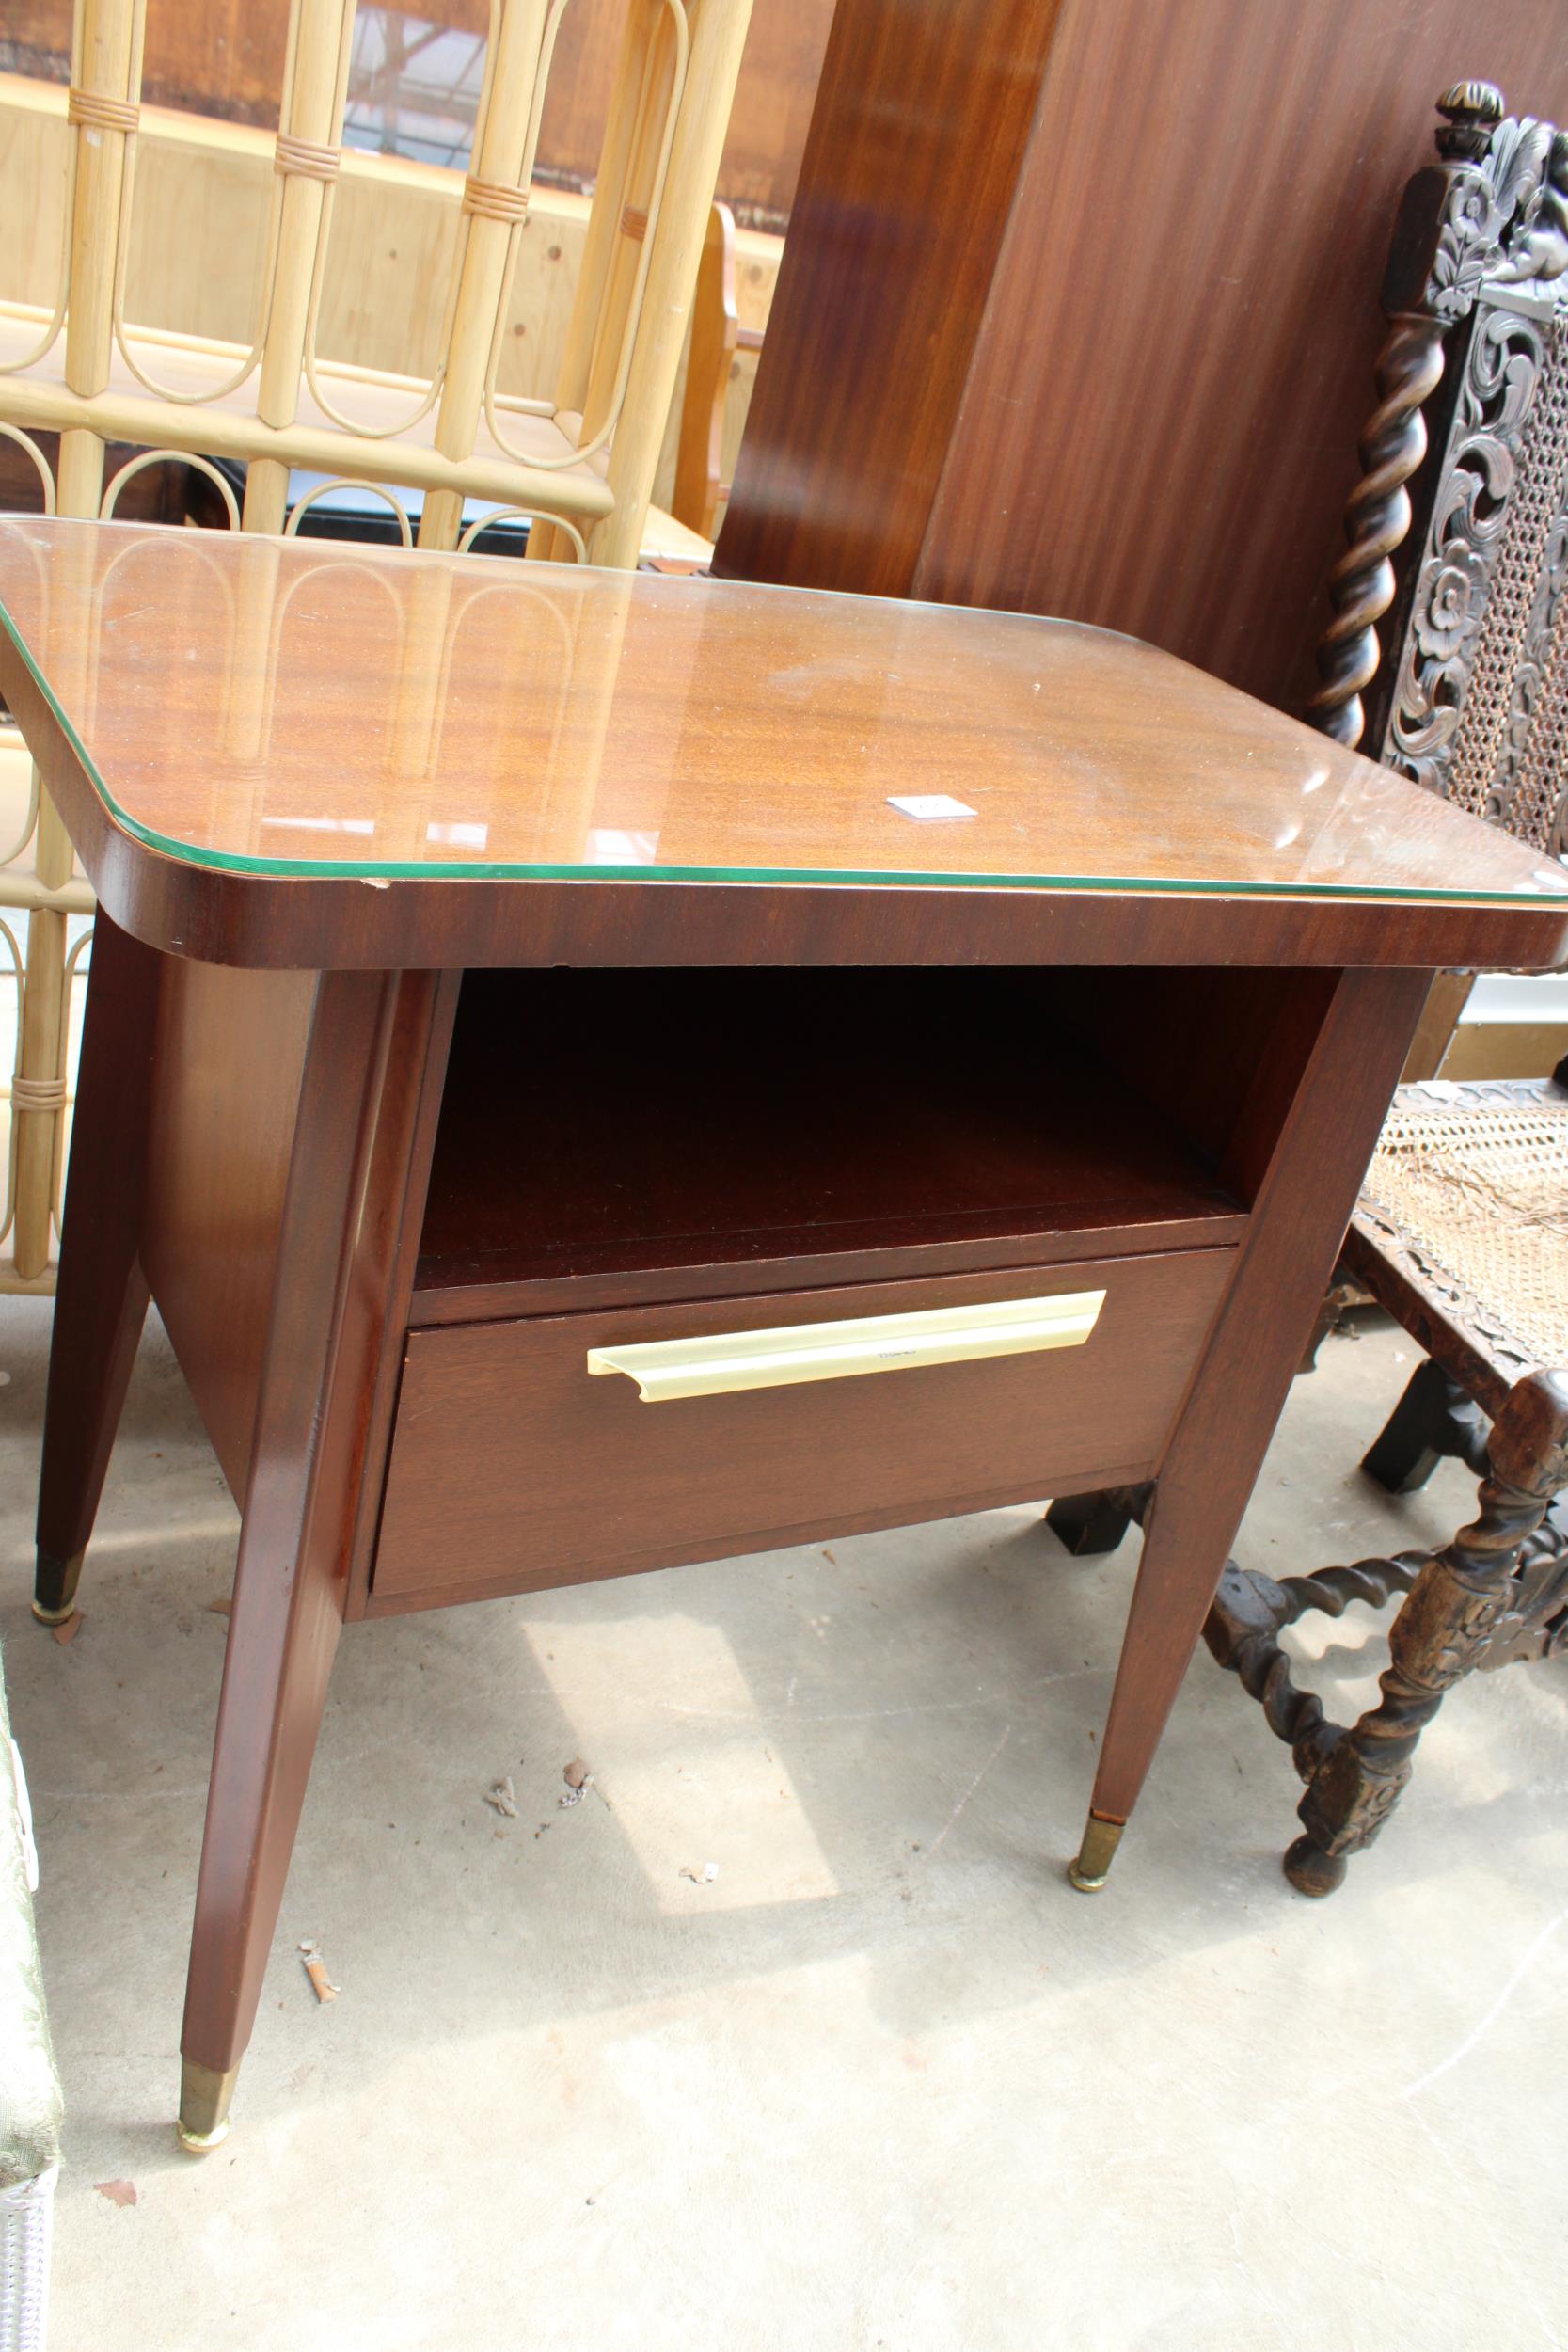 A MID 20TH CENTURY ARCLIGHT SIDE-TABLE WITH SINGLE DRAWER, 30" WIDE - Image 2 of 3